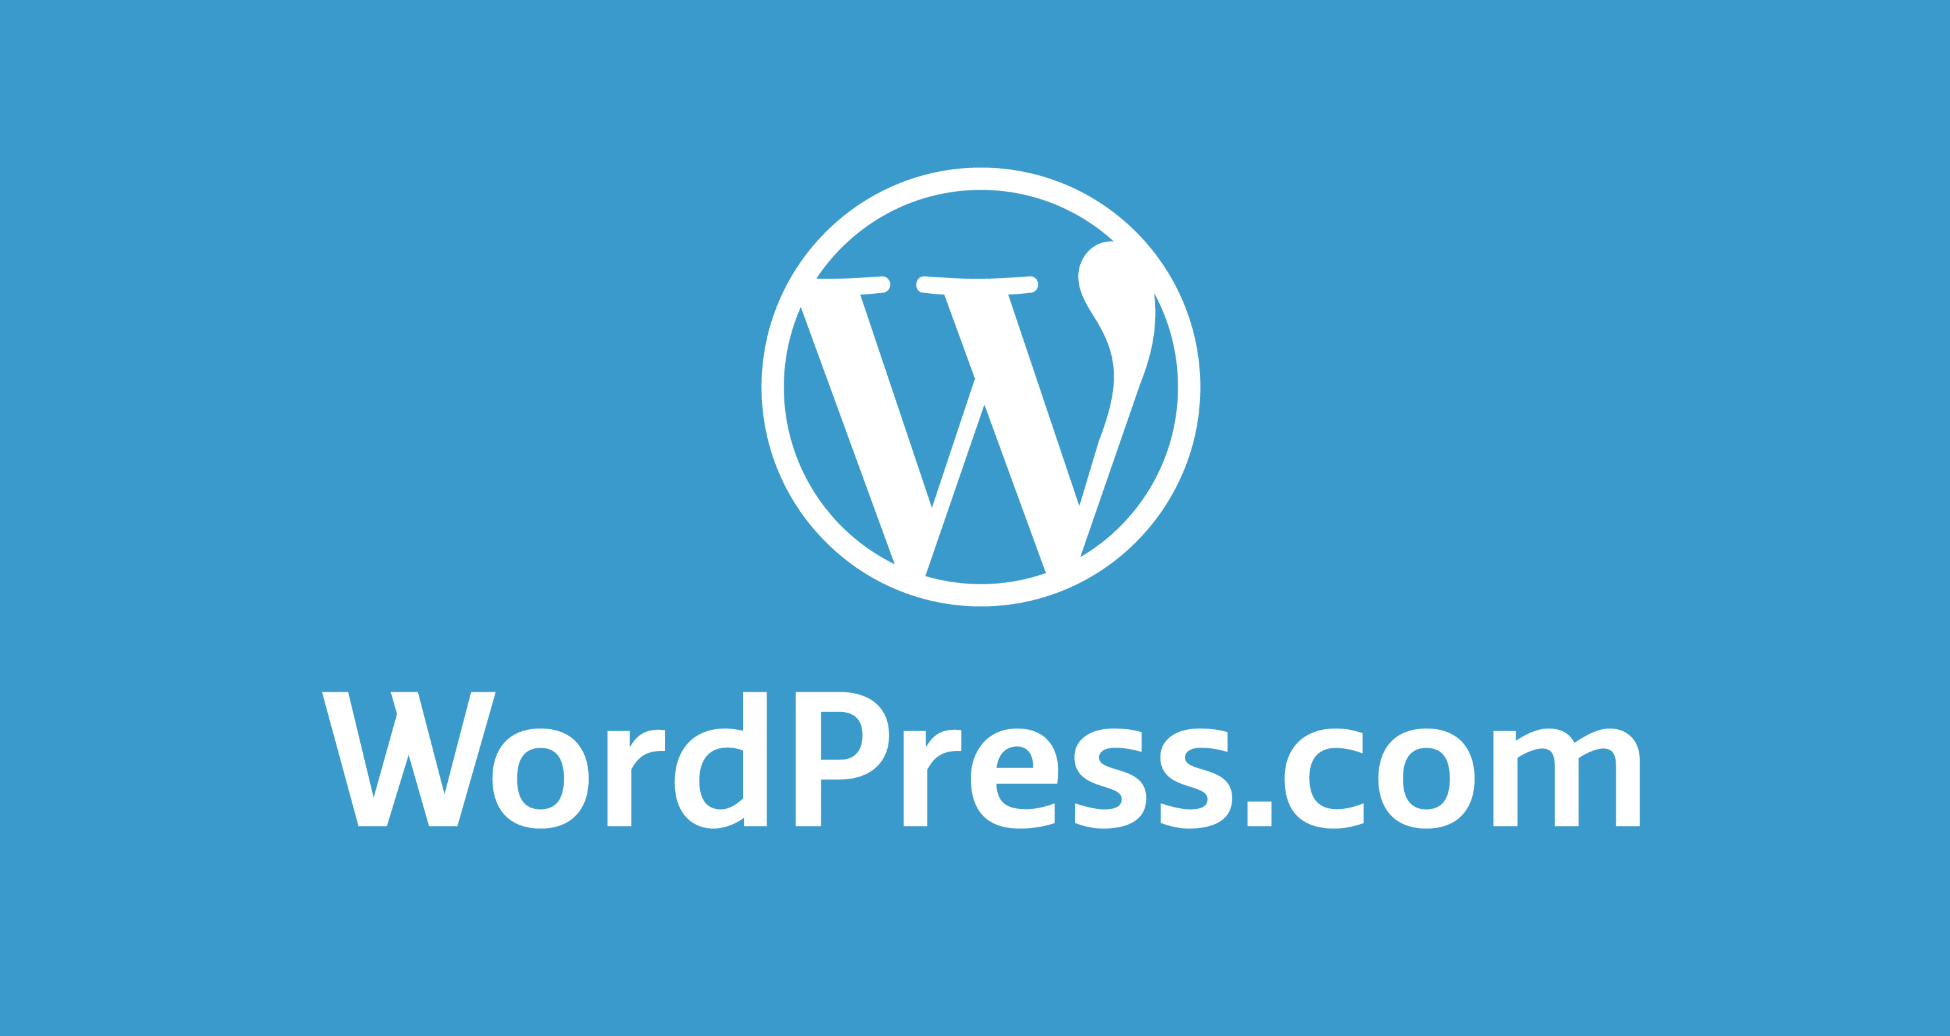 WordPress.com Launches 100-Year Domain and Hosting Plan for $38K